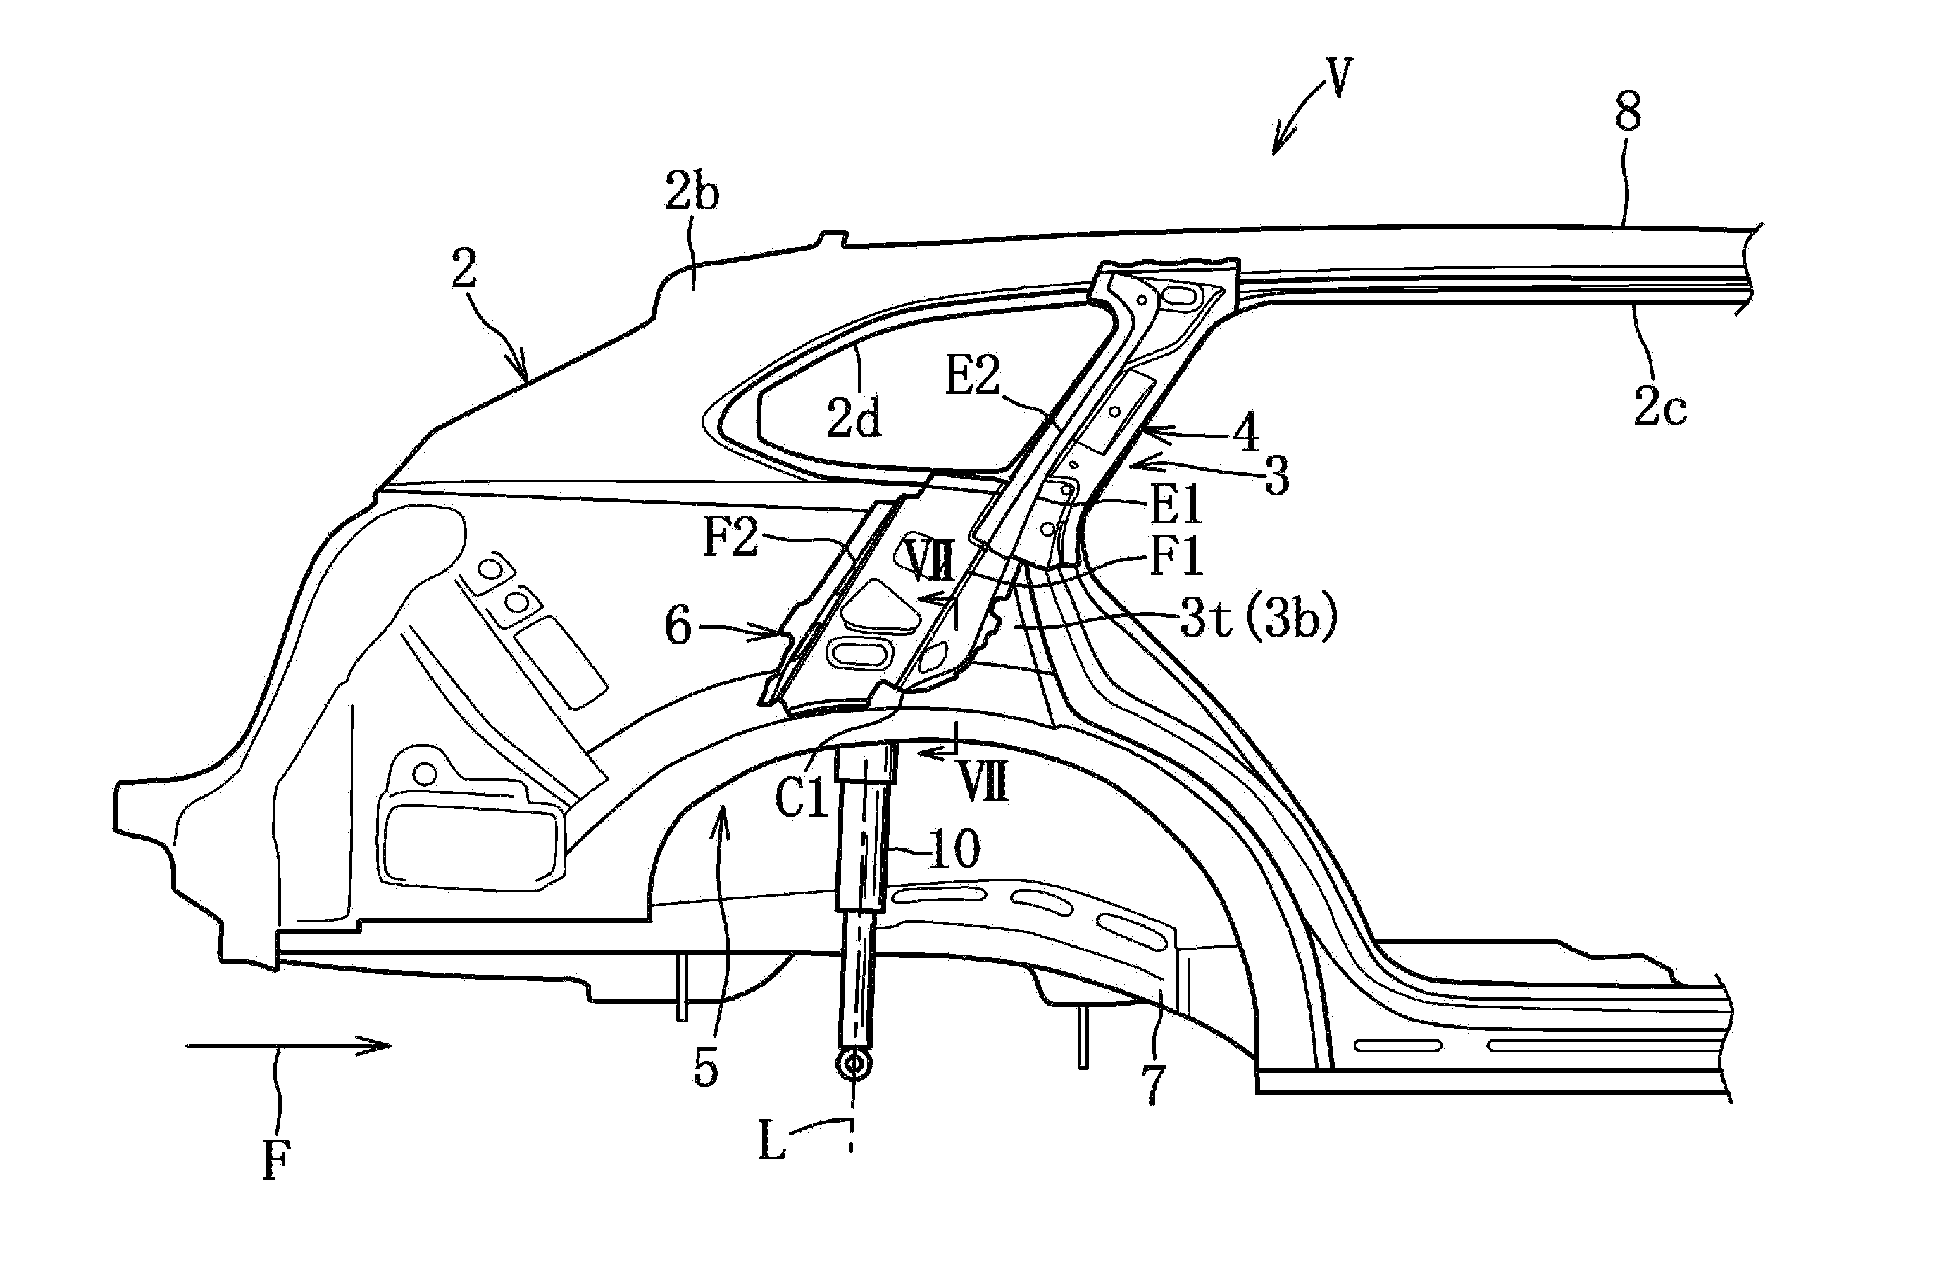 Rear vehicle-body structure of vehicle